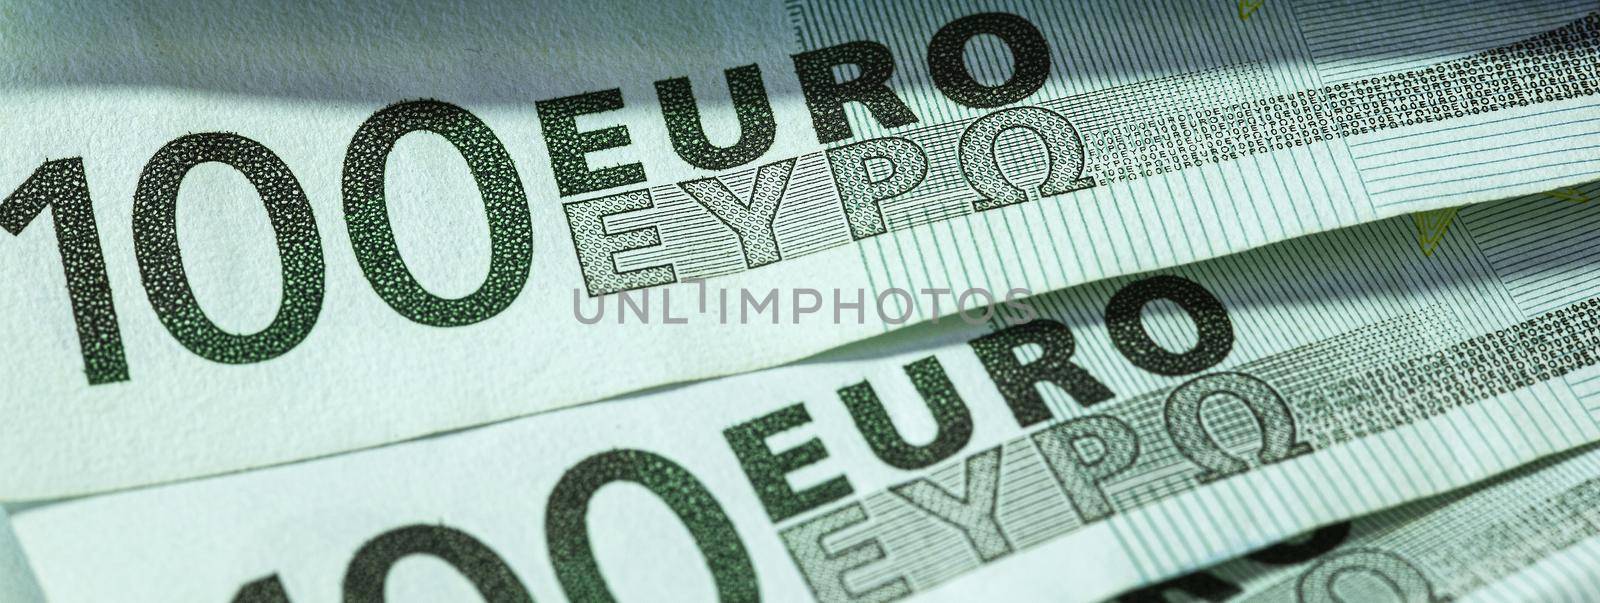 Euro bill detail banner 3 by pippocarlot